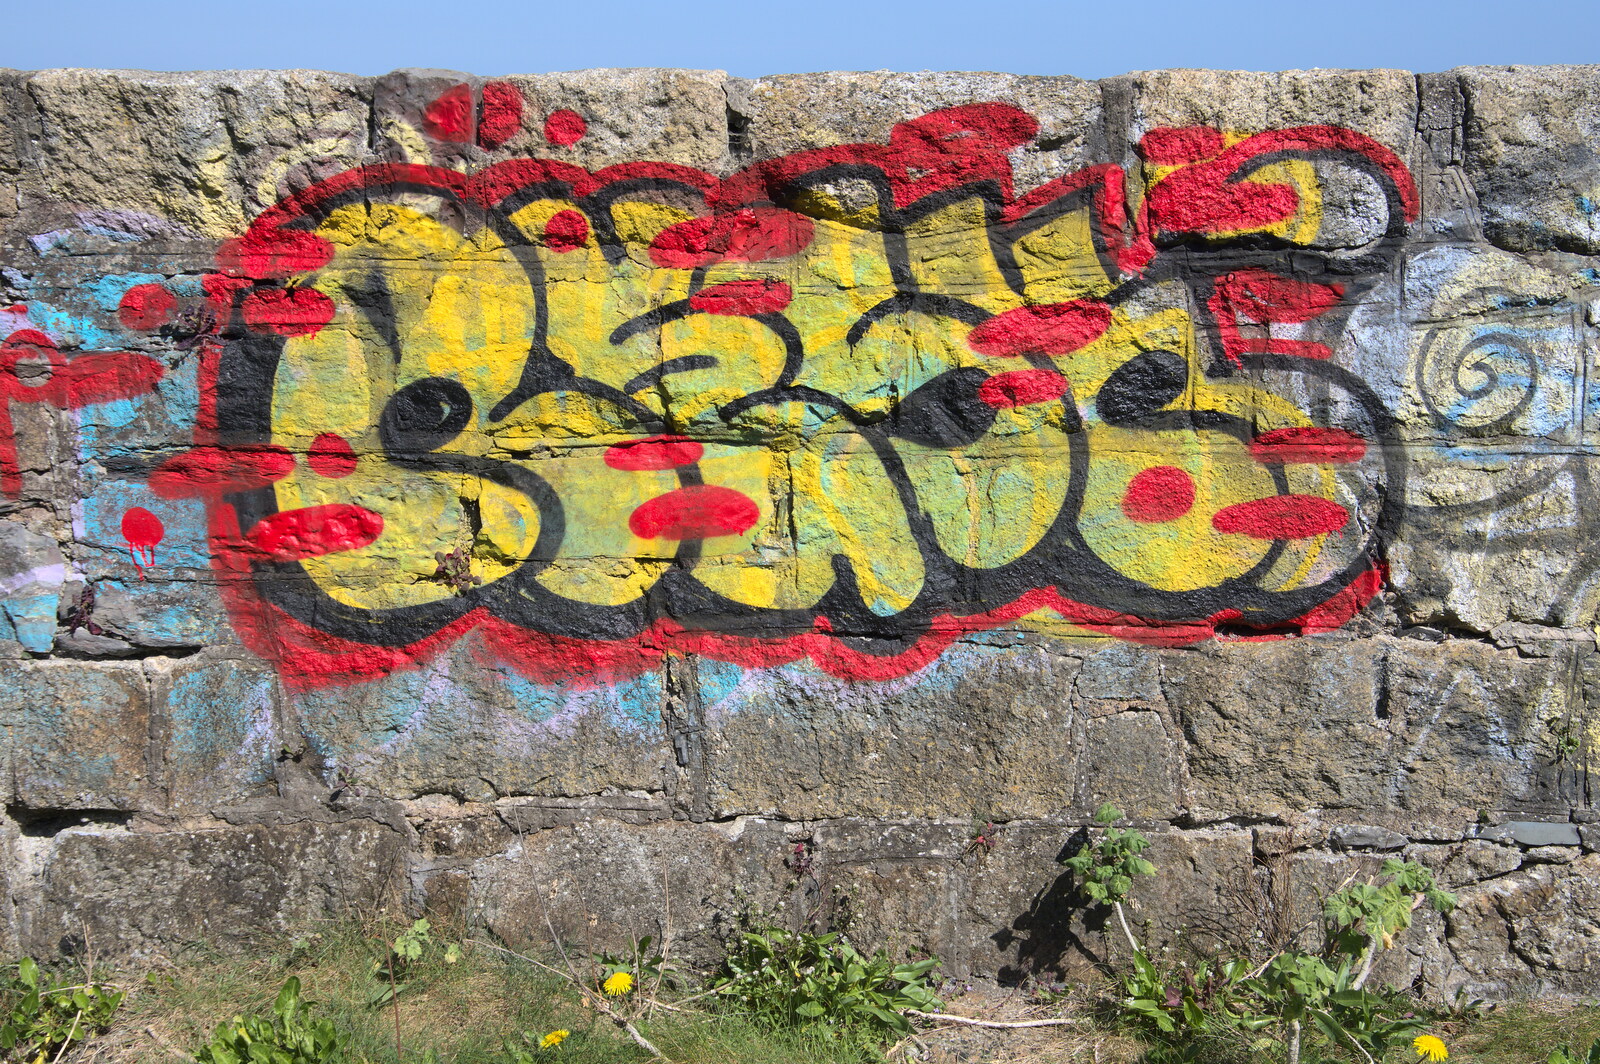 Blackrock North and South, Louth and County Dublin, Ireland - 23rd April 2022: A bright yellow tag